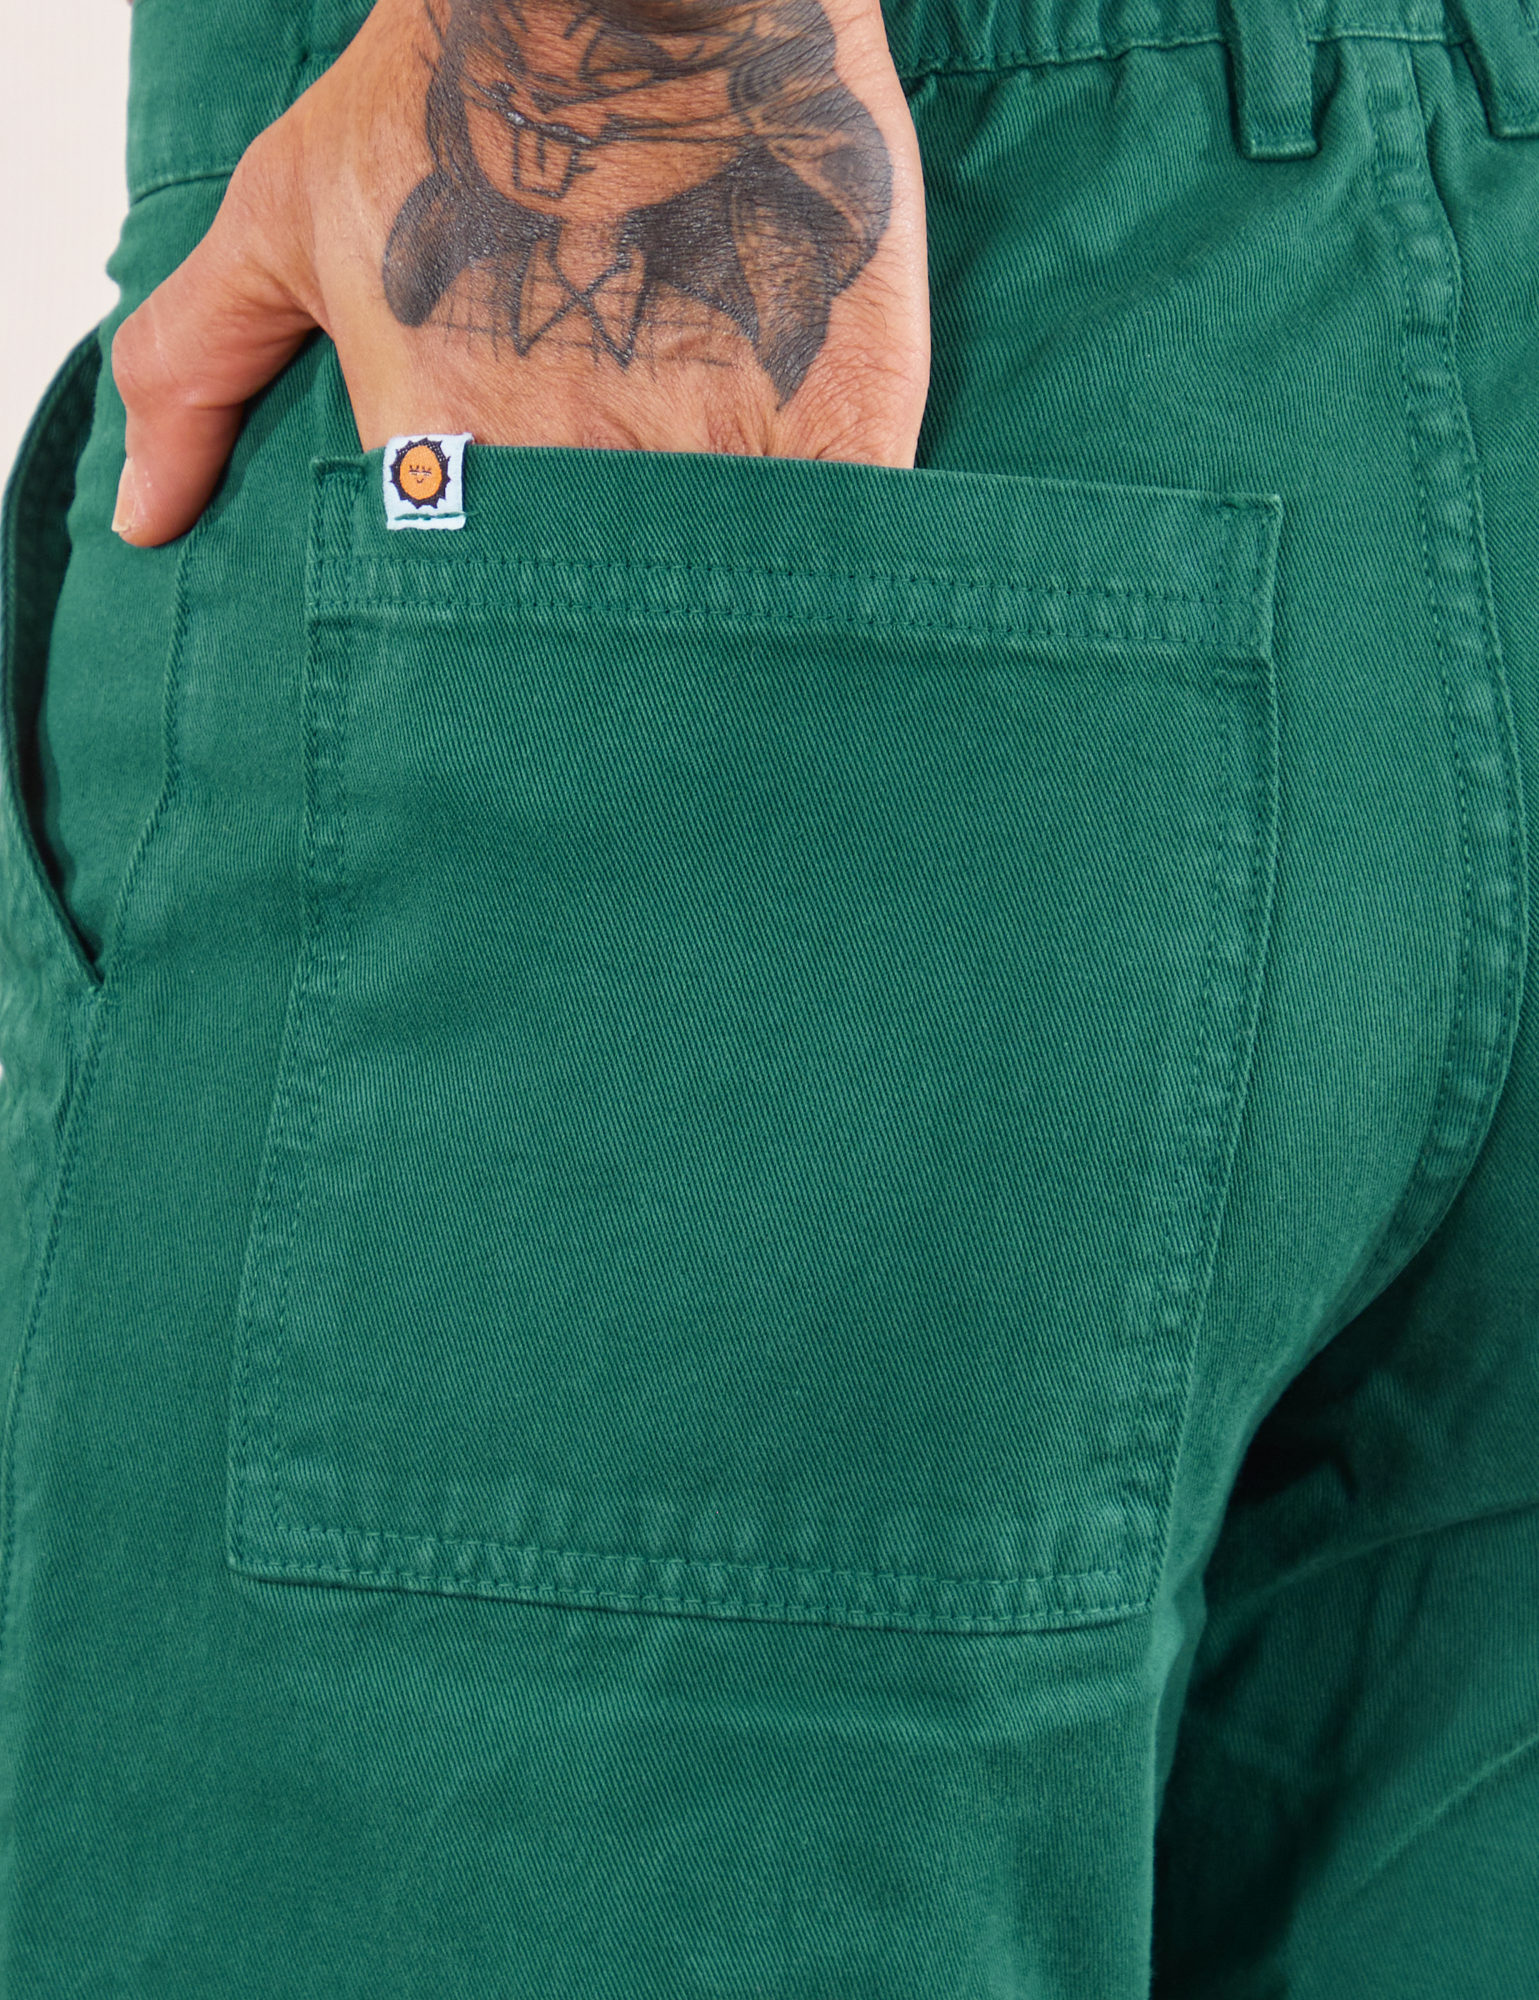 Back pocket close up of Work Pants in Hunter Green. Jesse has their hand in the pocket.